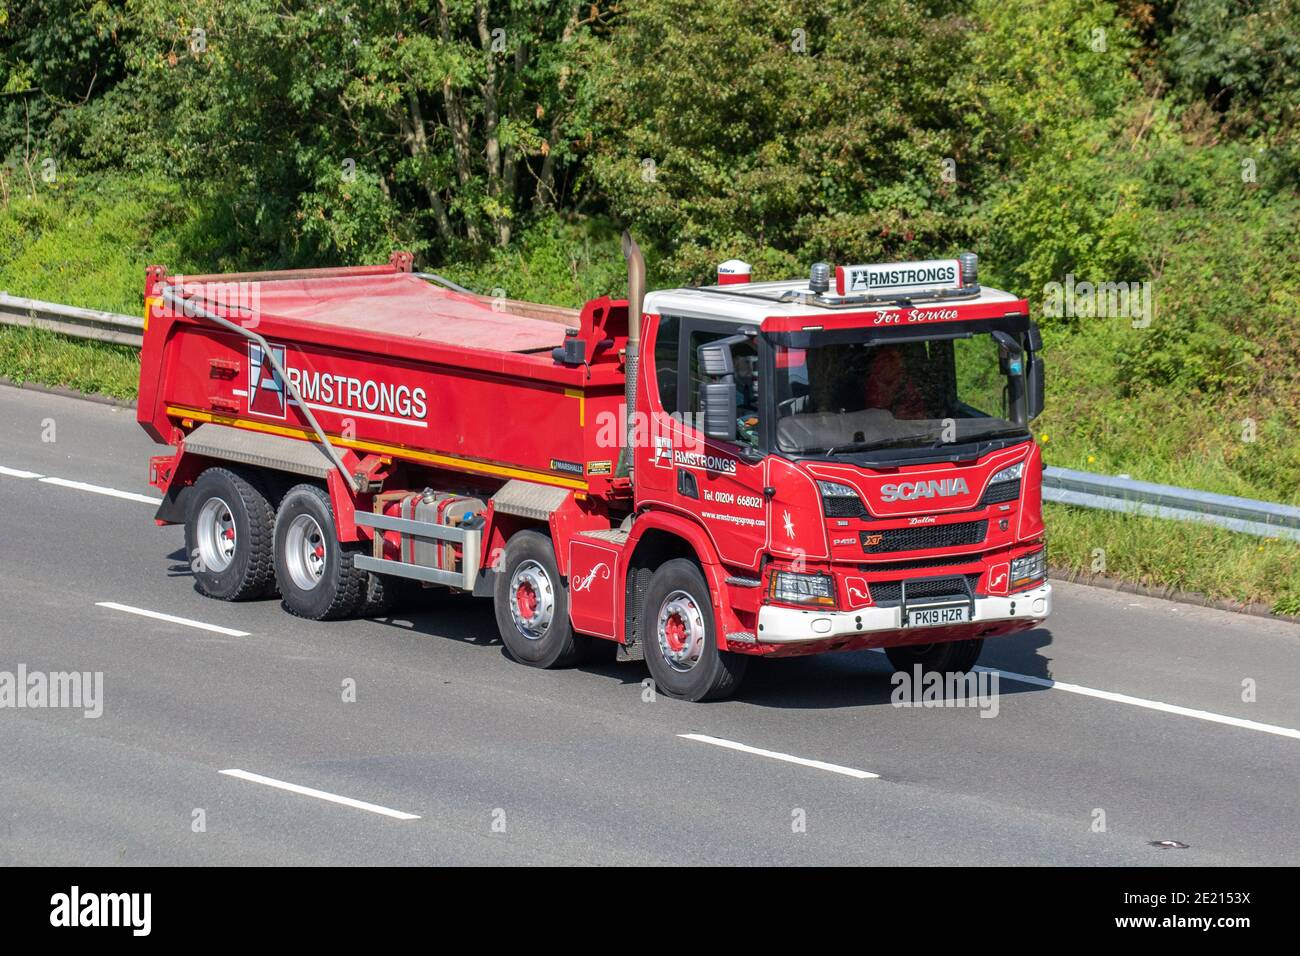 Armstrongs For Service Haulage delivery trucks, lorry, heavy-duty vehicles, transportation, truck, cargo carrier, Scania P410 vehicle, European commercial transport industry HGV, M6 at Manchester, UK Stock Photo